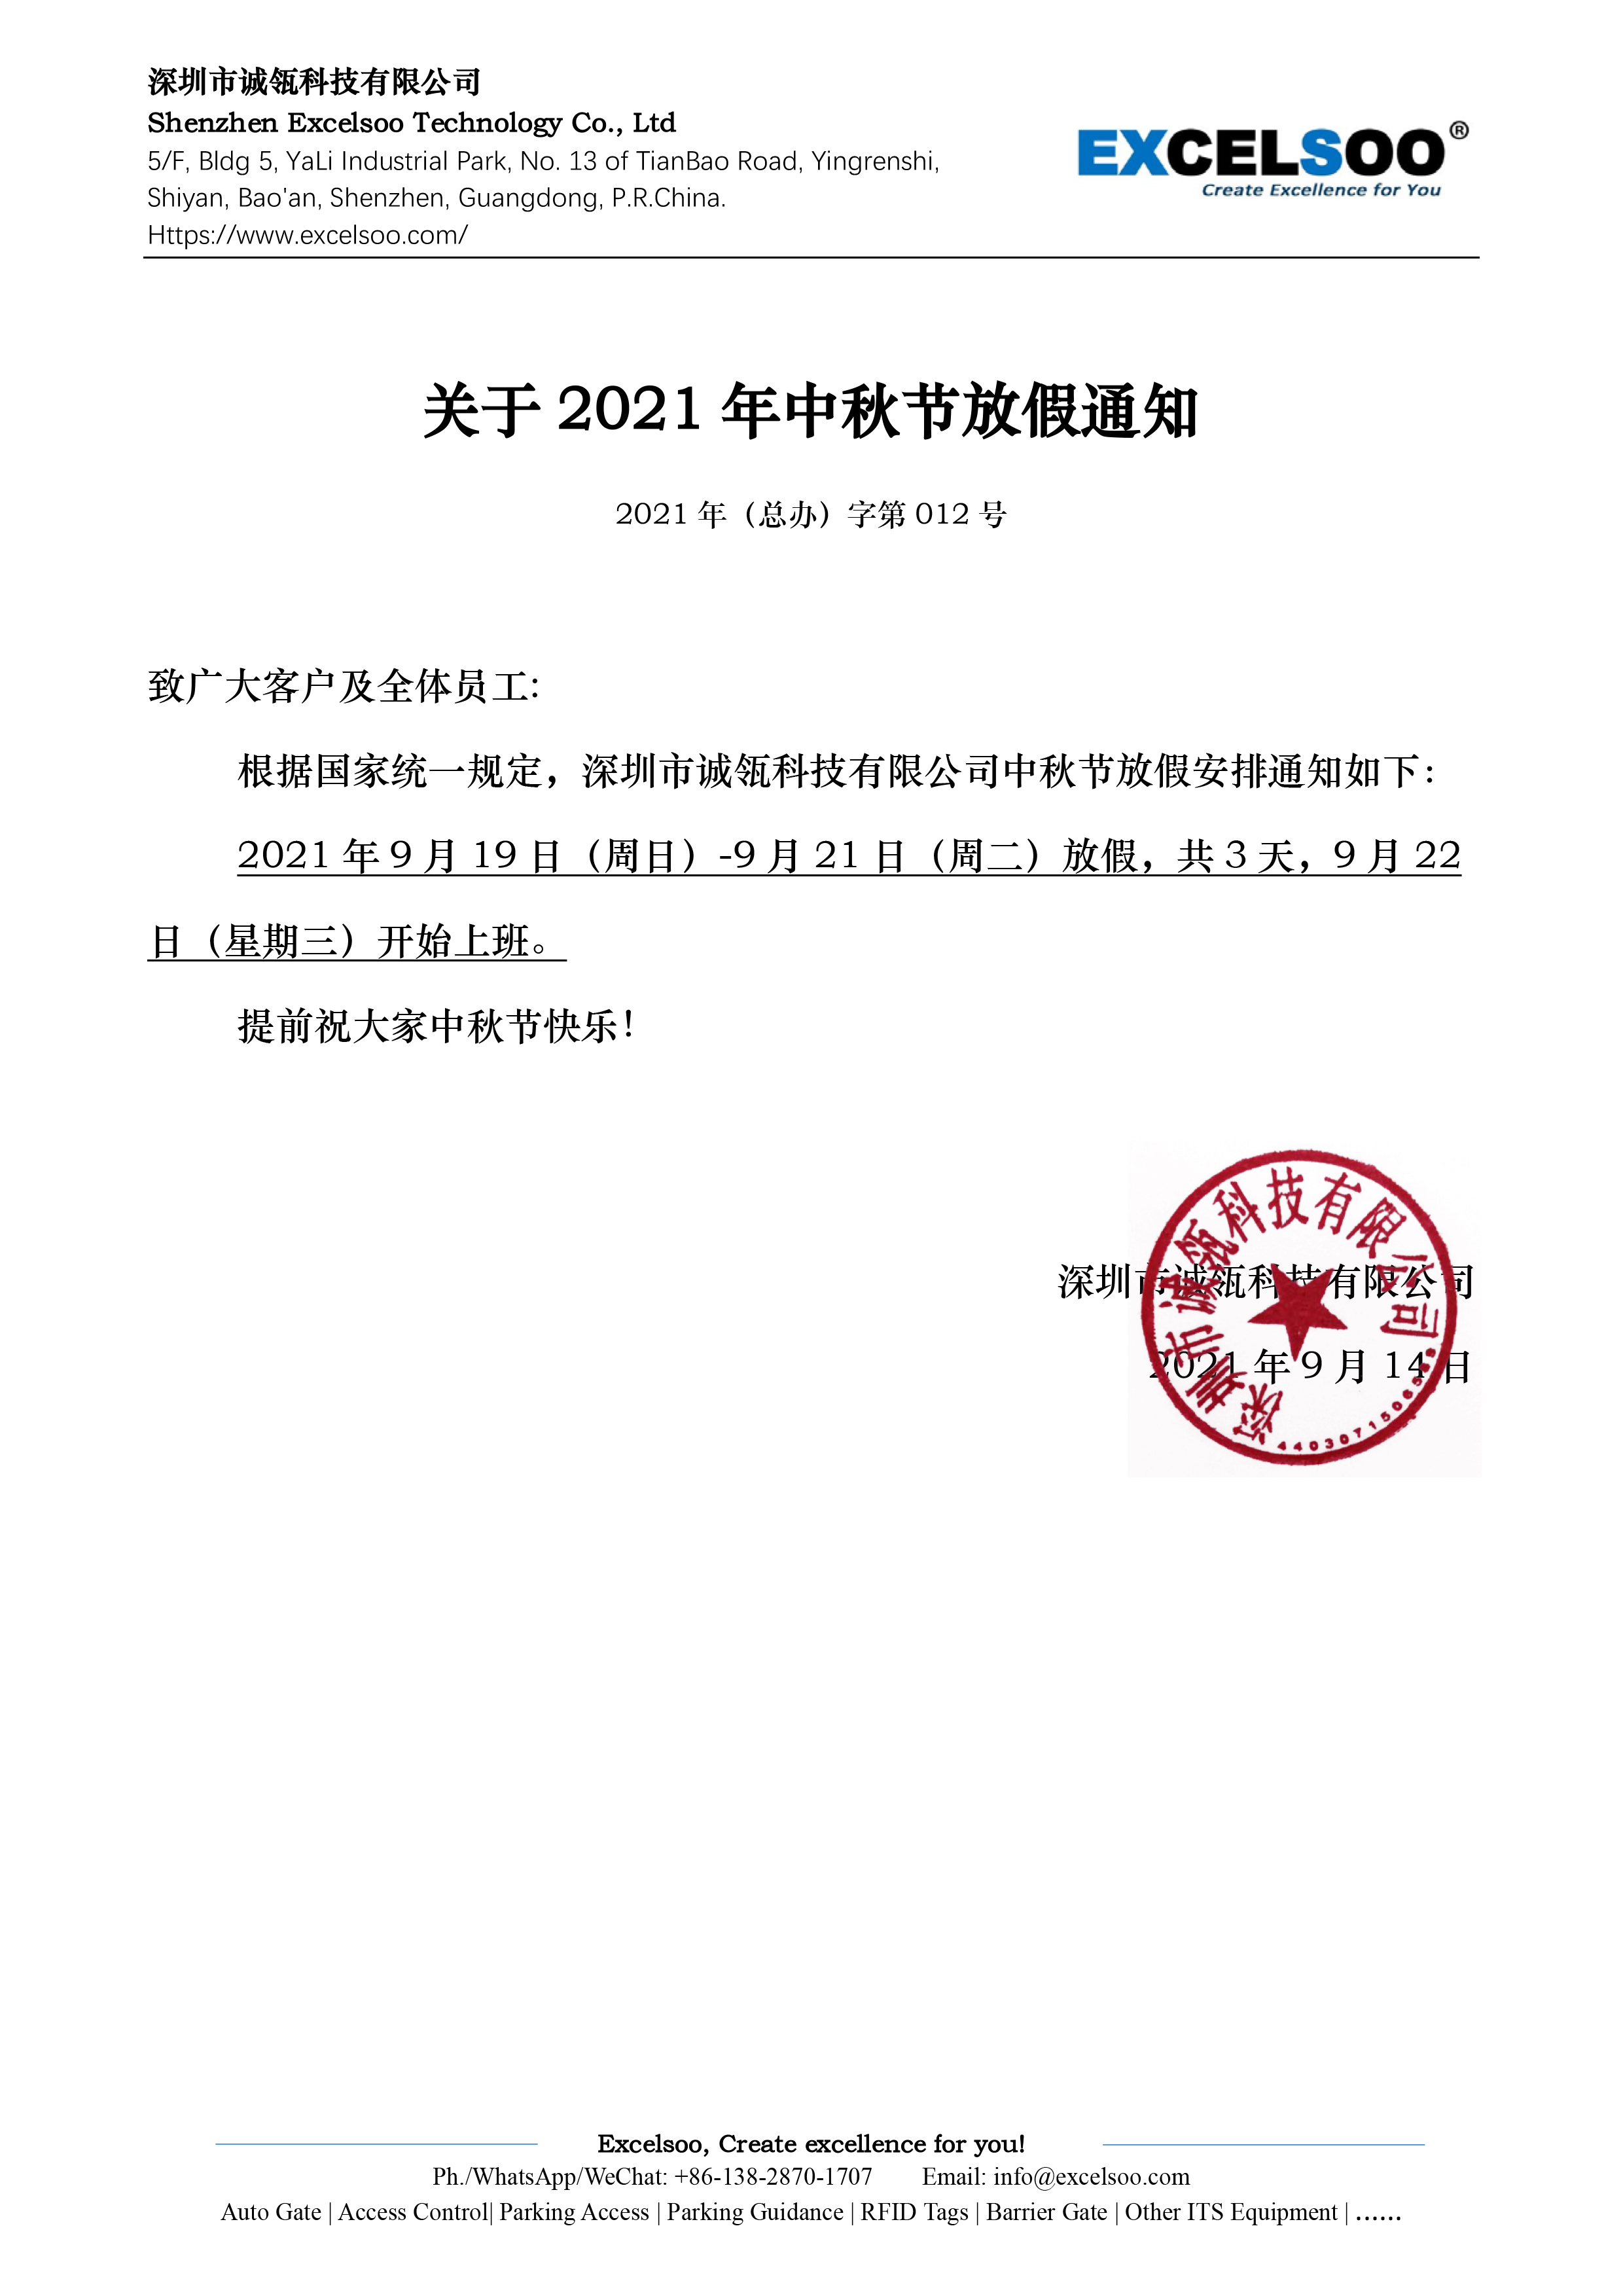 Excelsoo Notice of Holidays for Mid-Autumn Festival 2021